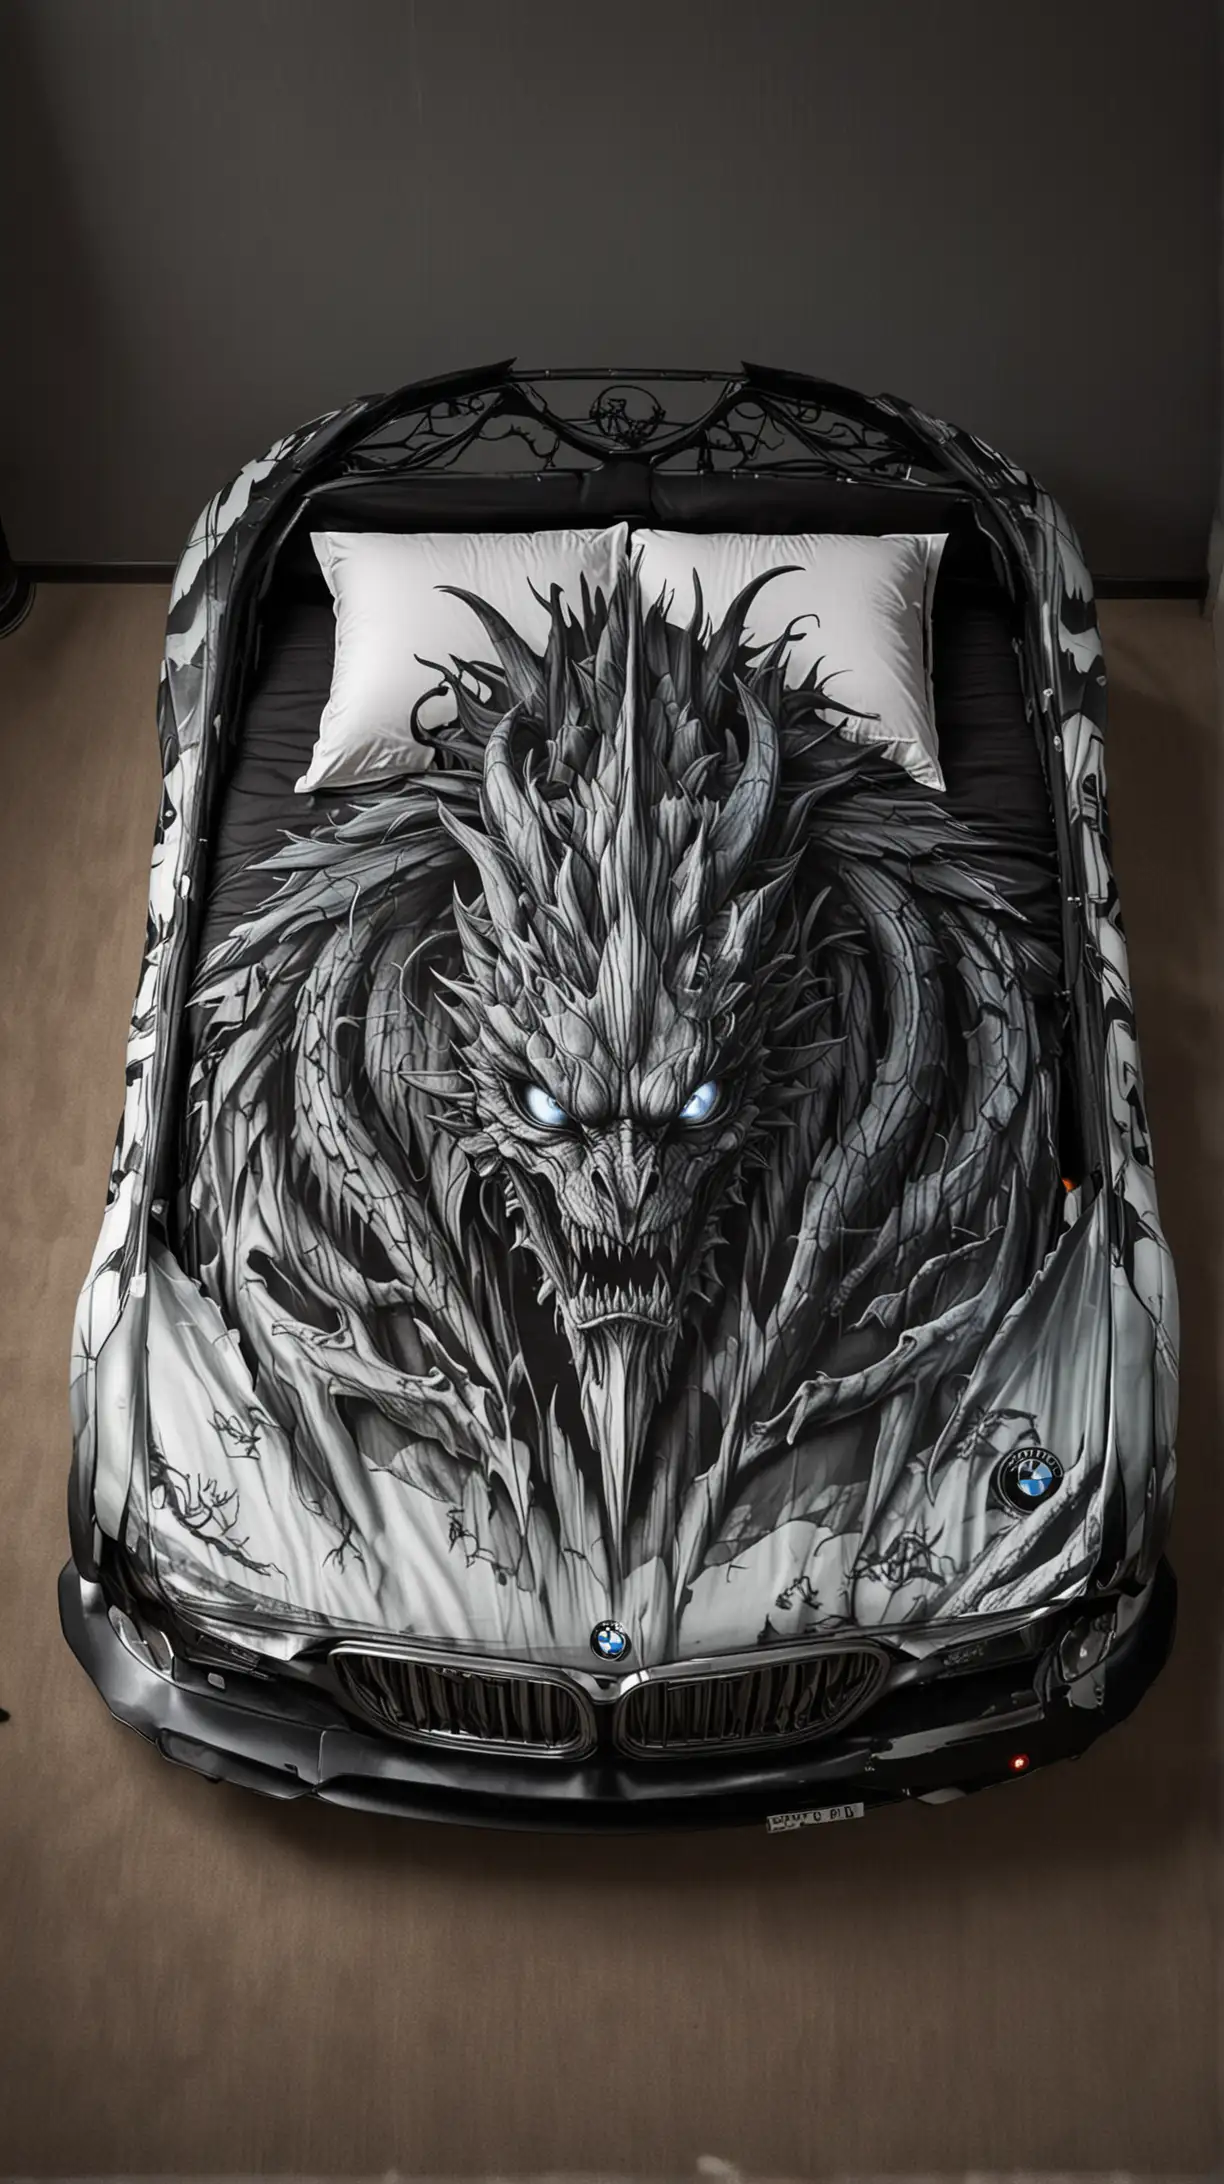 Luxurious BMW CarShaped Double Bed with Good and Evil Dragon Graphics